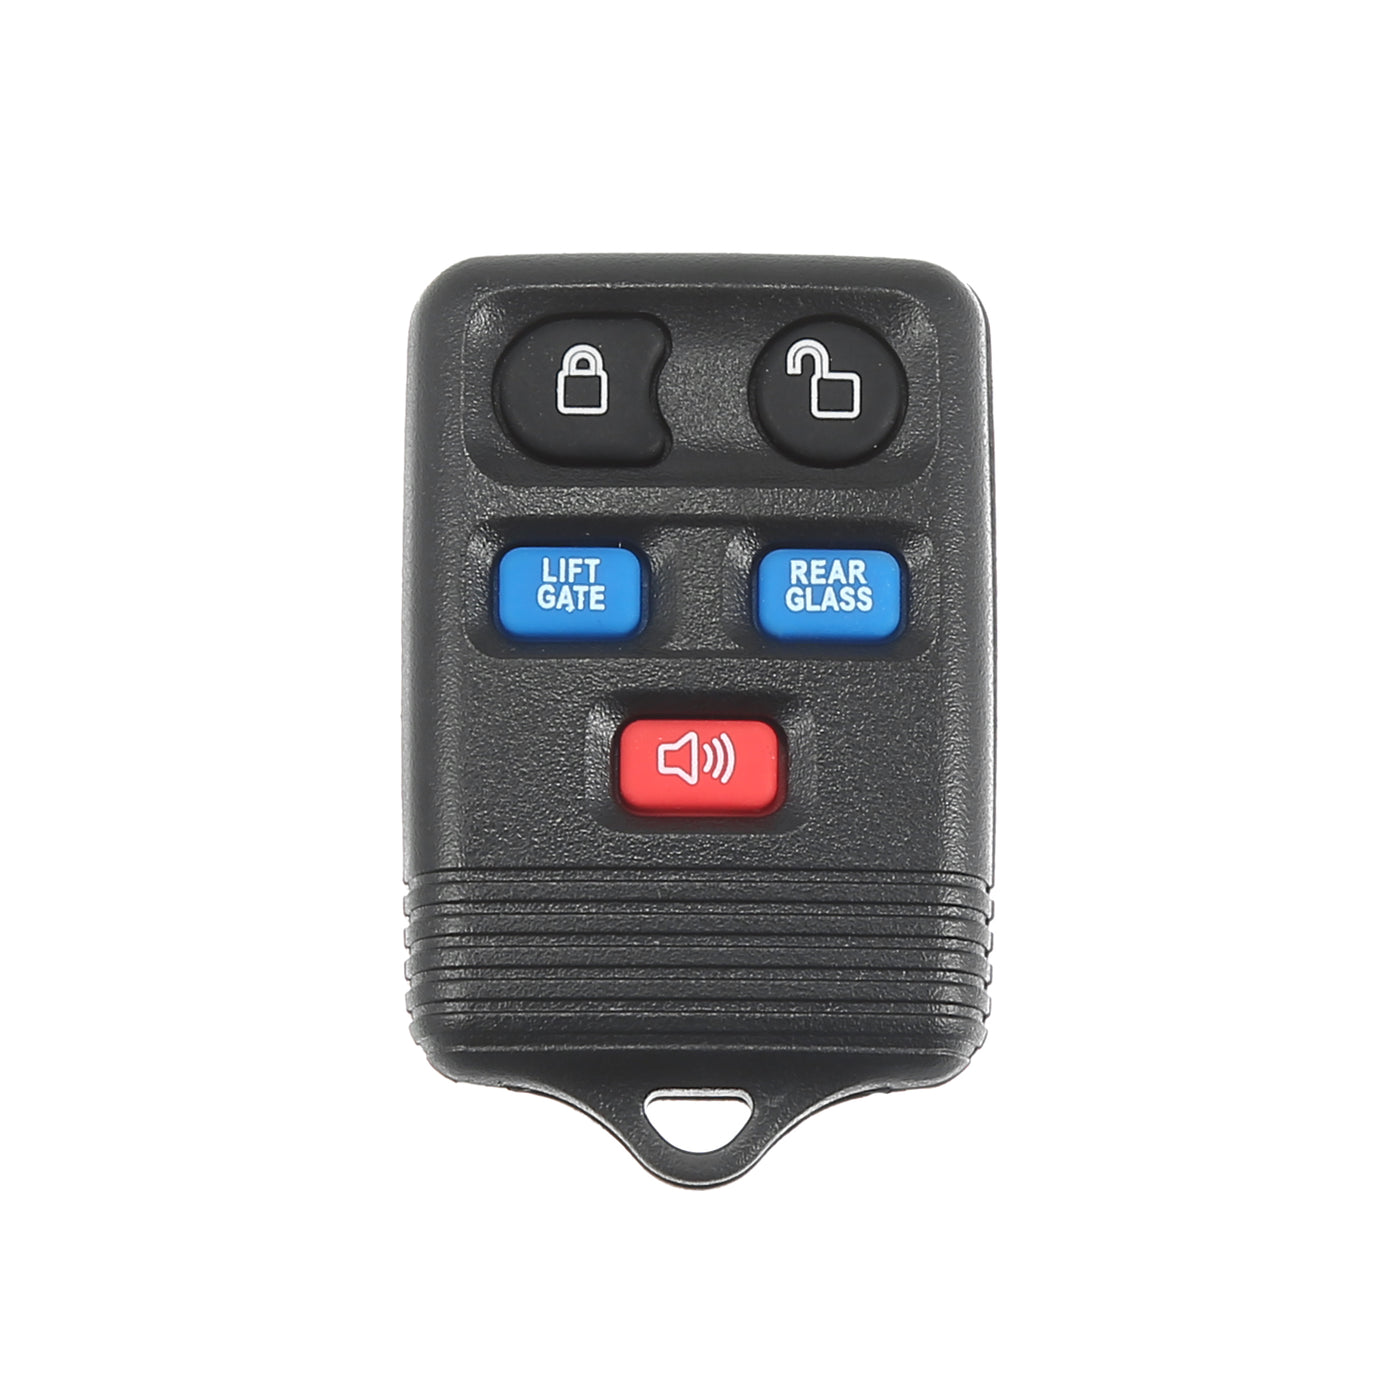 X AUTOHAUX 5 Button Car Keyless Entry Remote Control Replacement Key Fob Proximity Smart Fob CWTWB1U511 for Lincoln Navigator 2003-2007 315MHz